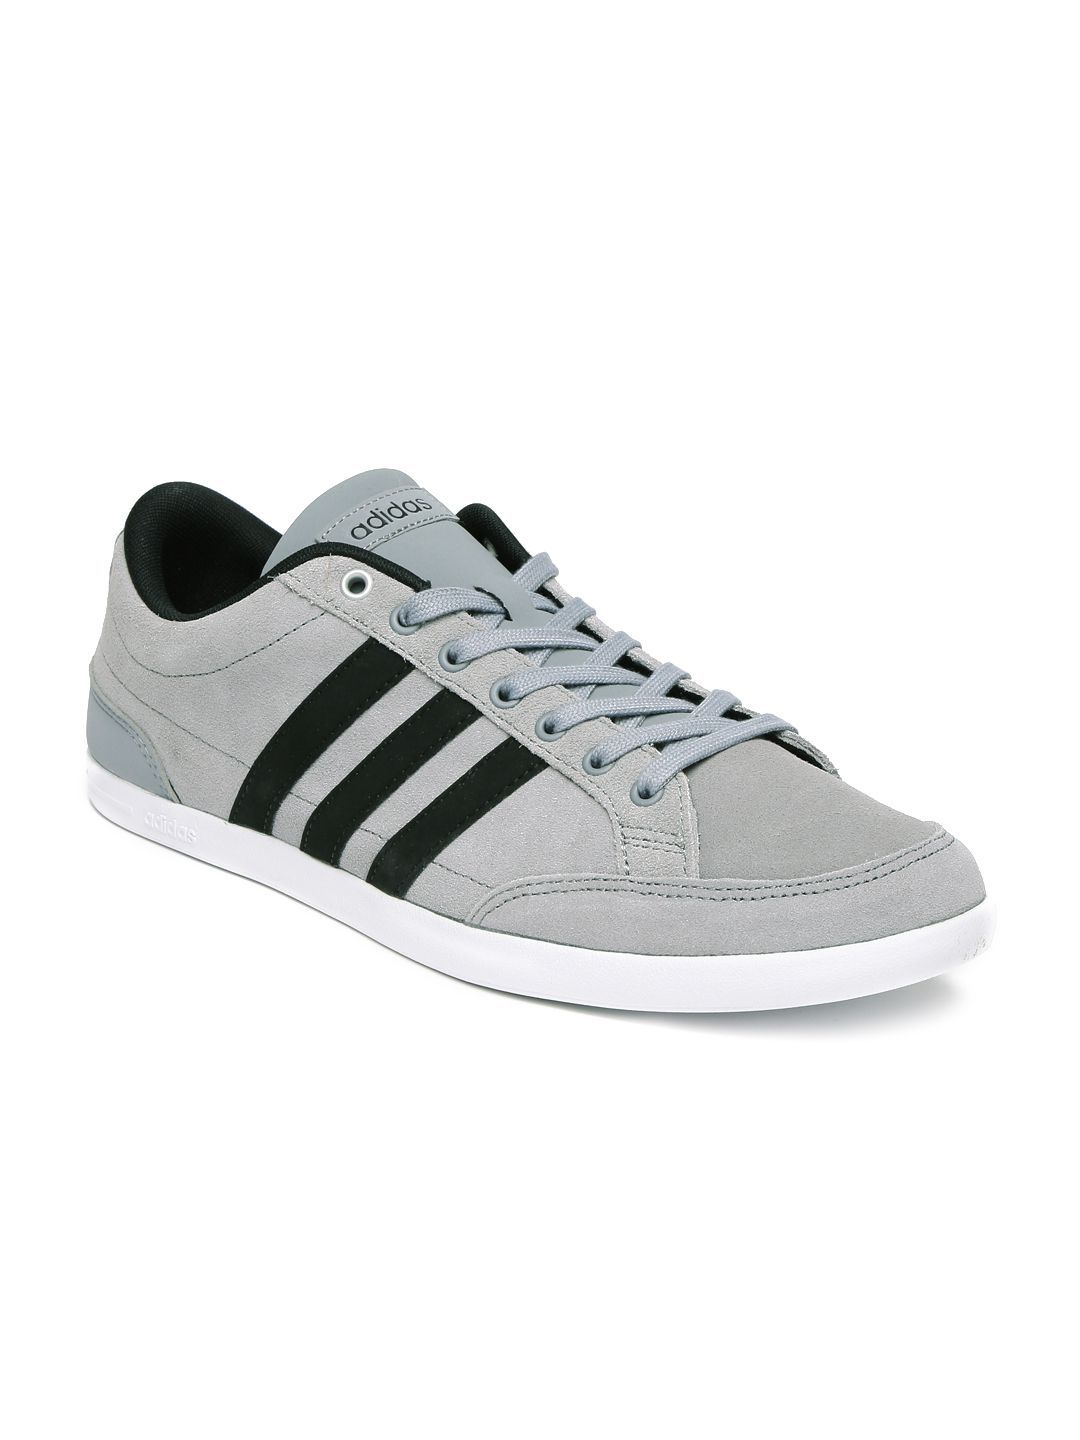 caflaire shoes adidas